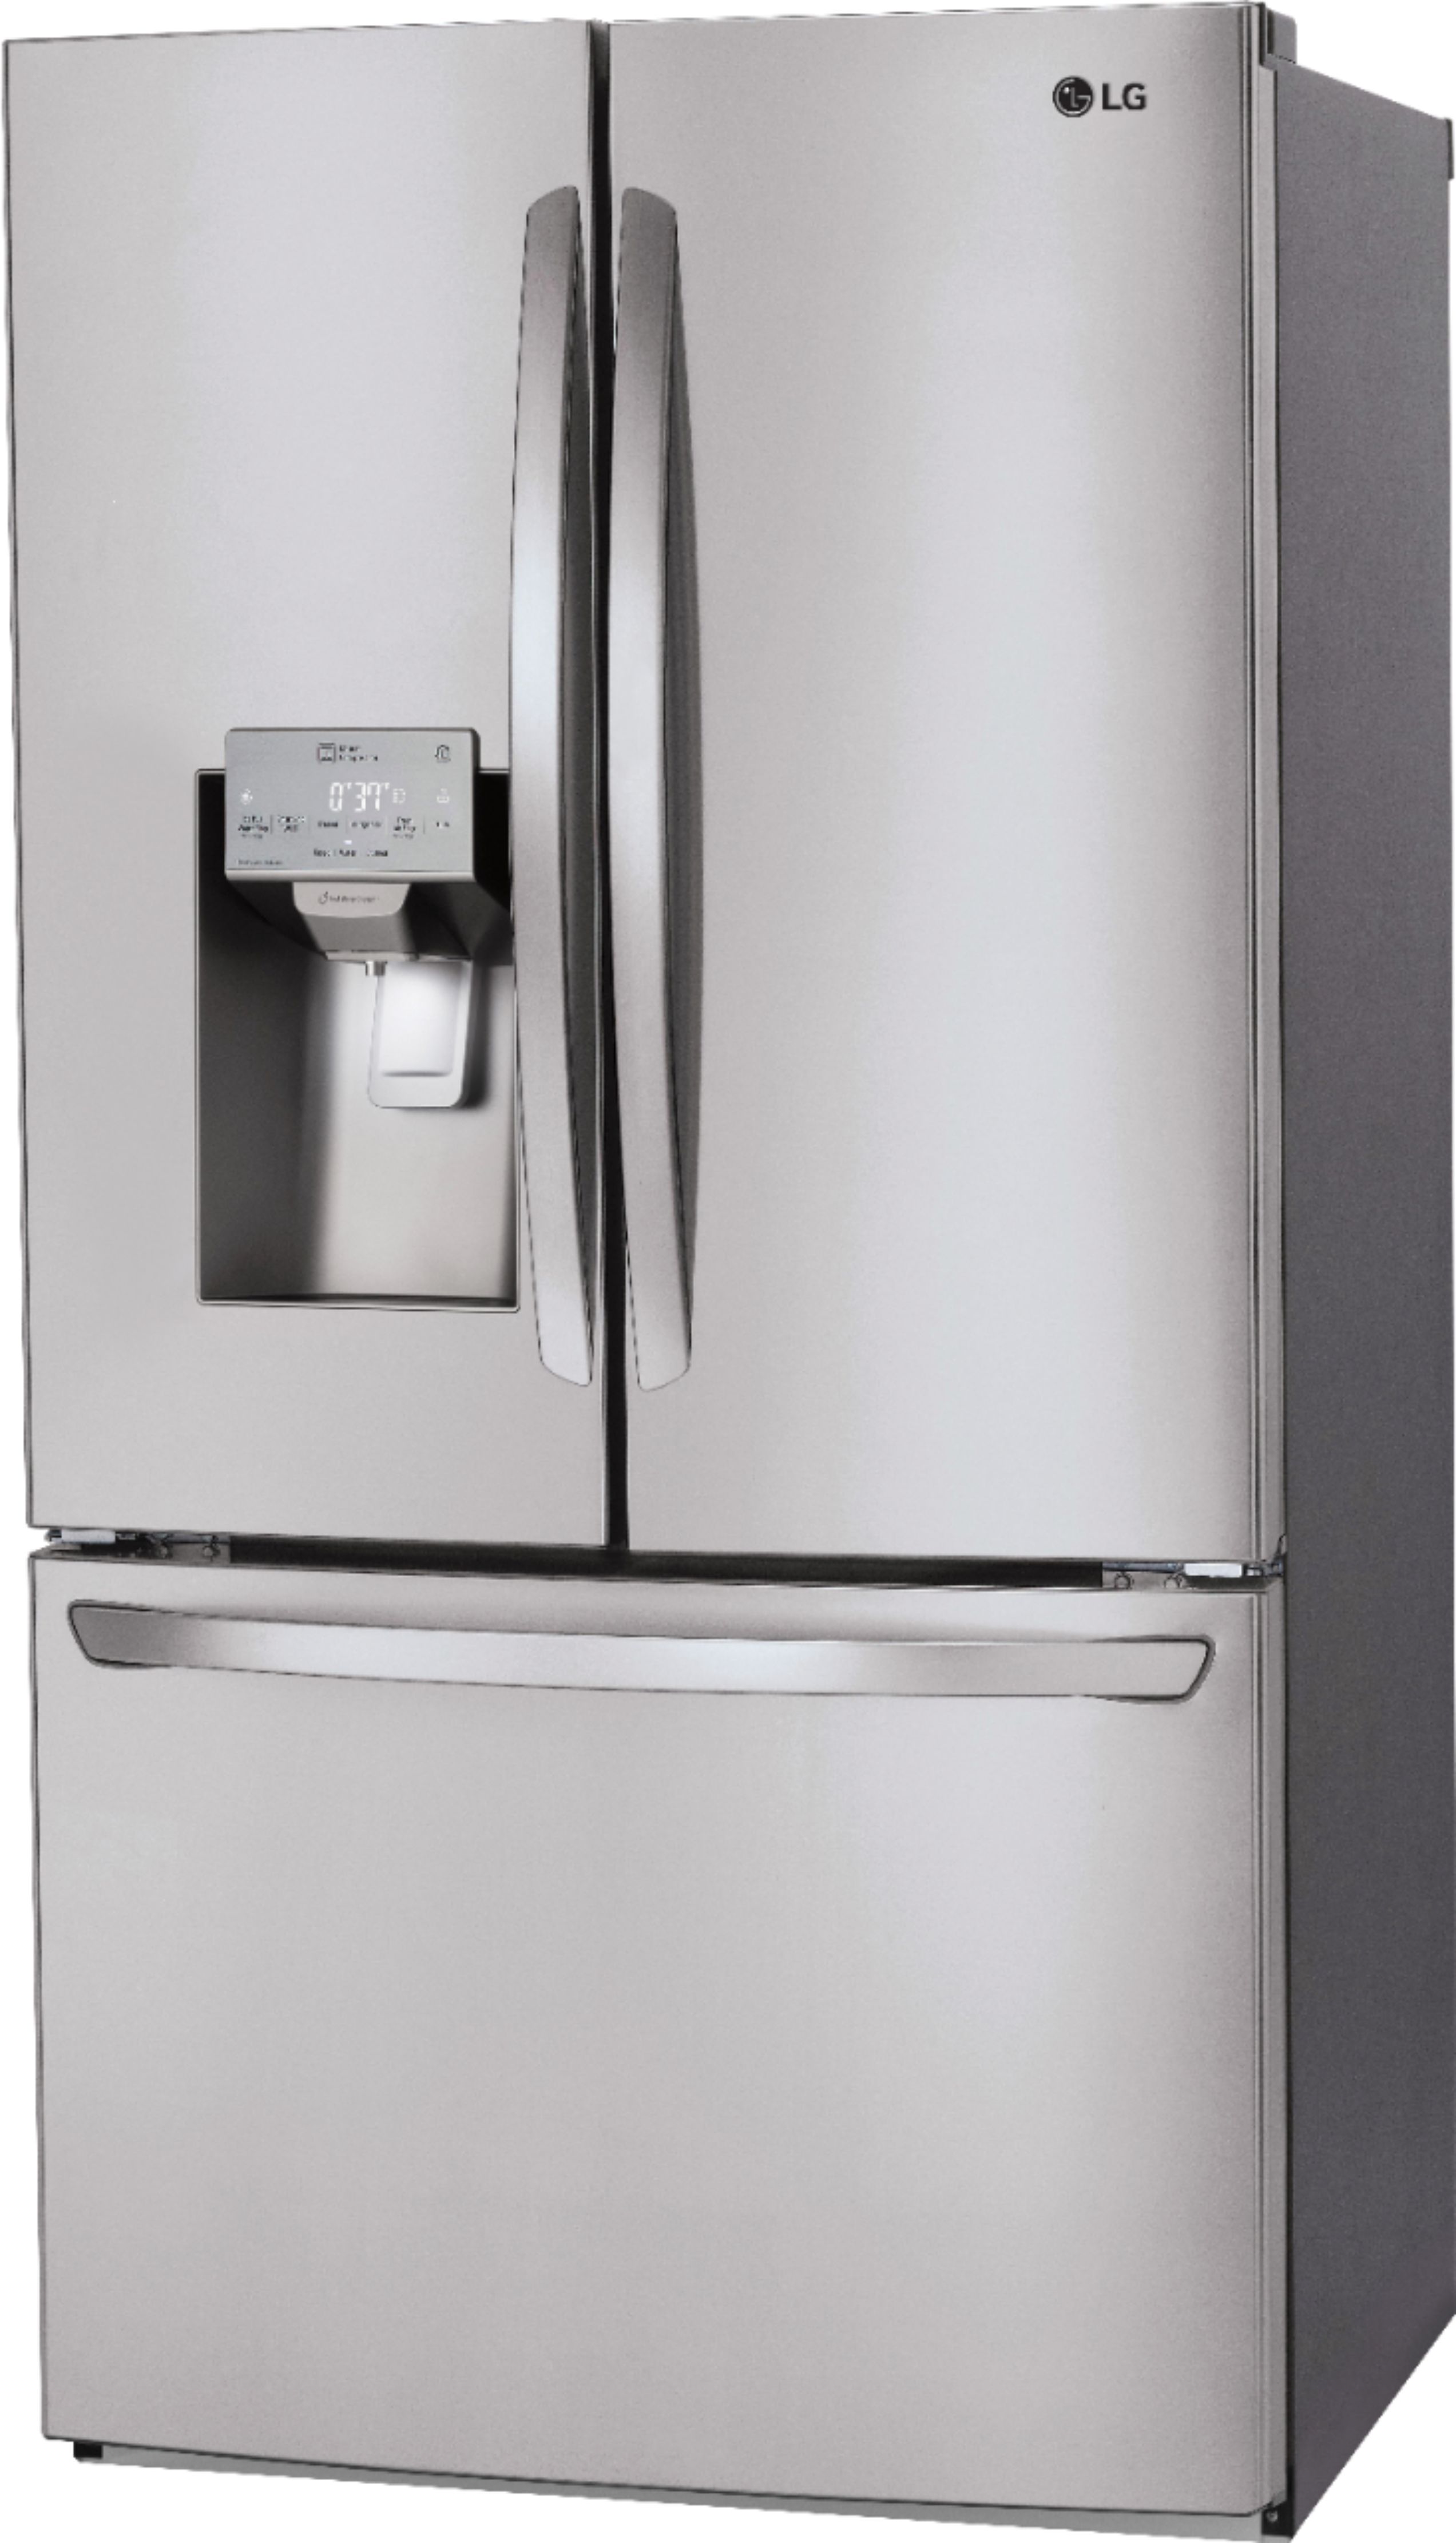 LG 27.9 French Door Smart Wi-Fi Enabled Refrigerator Stainless steel Best Buy Stainless Steel Refrigerator